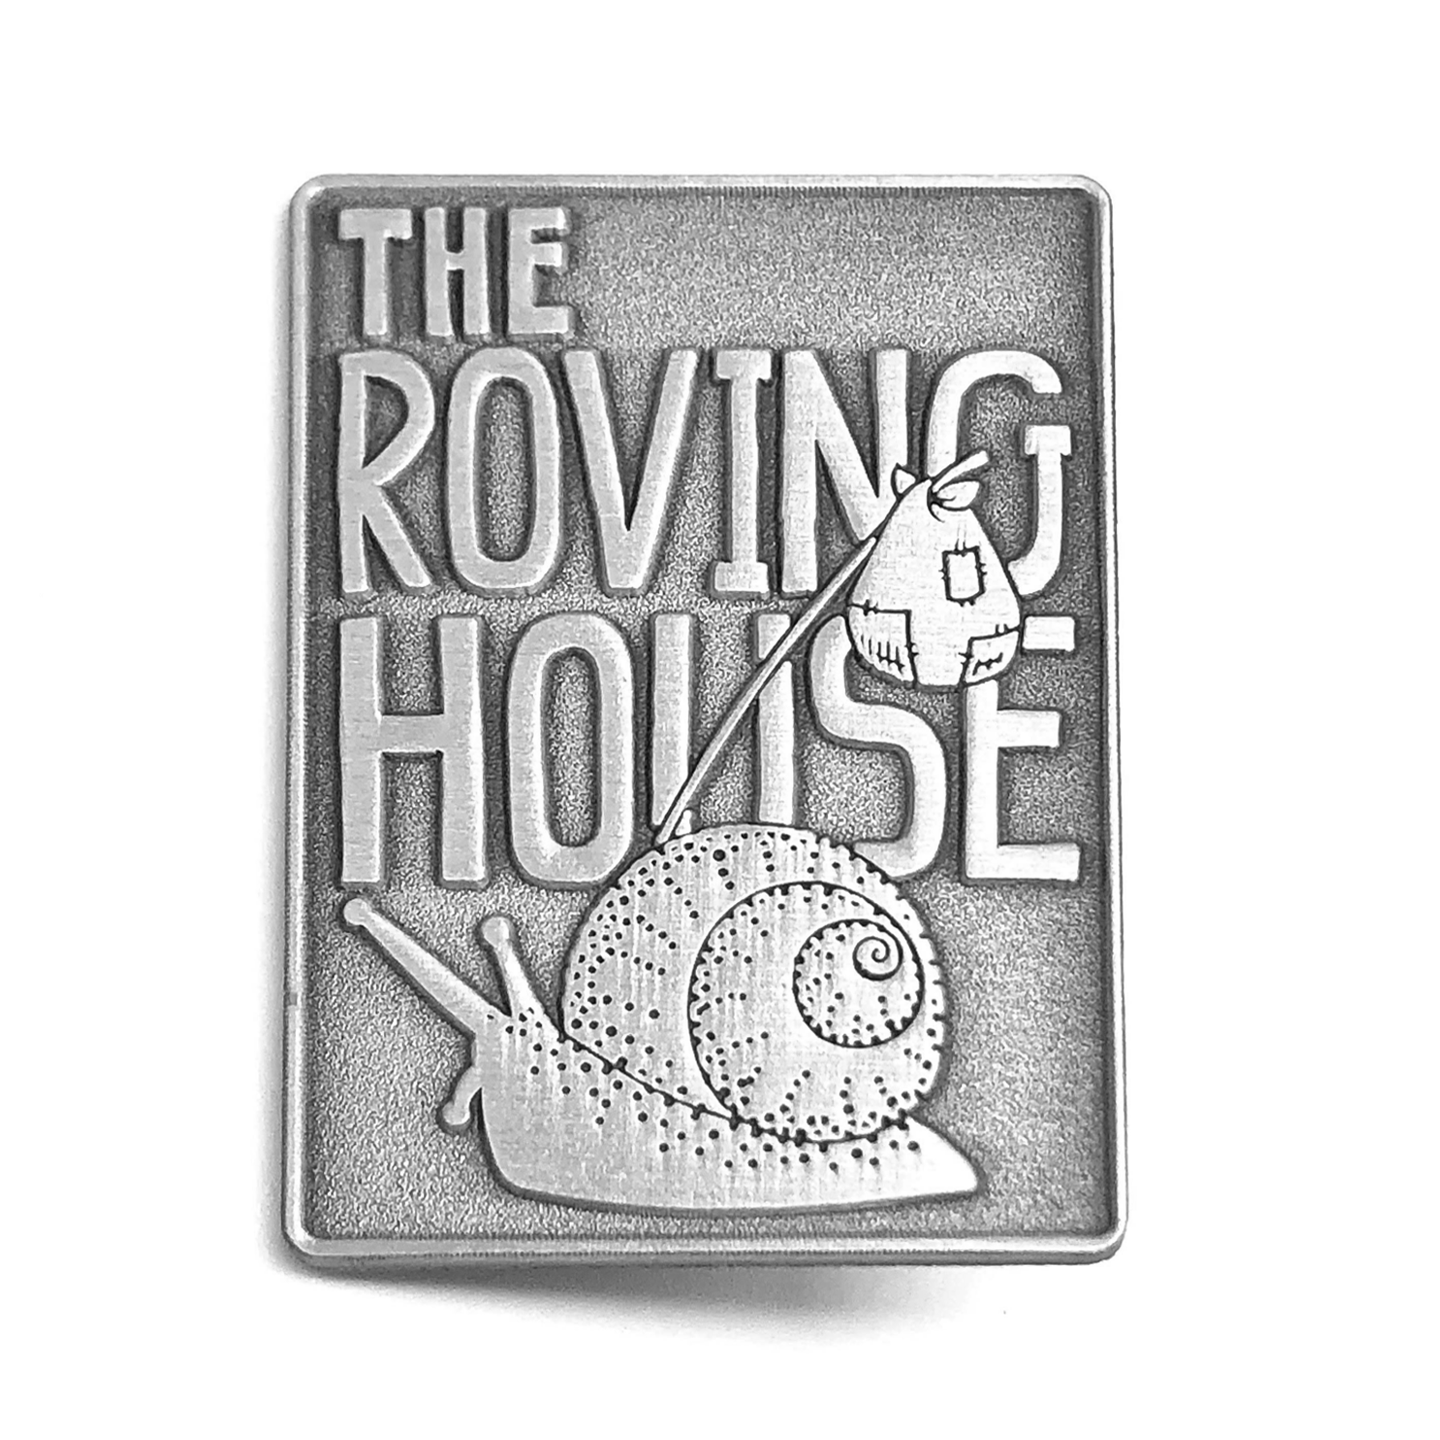 A silver, rectangular metal pin of a snail carrying a bindle. Behind him is the text "The Roving House".